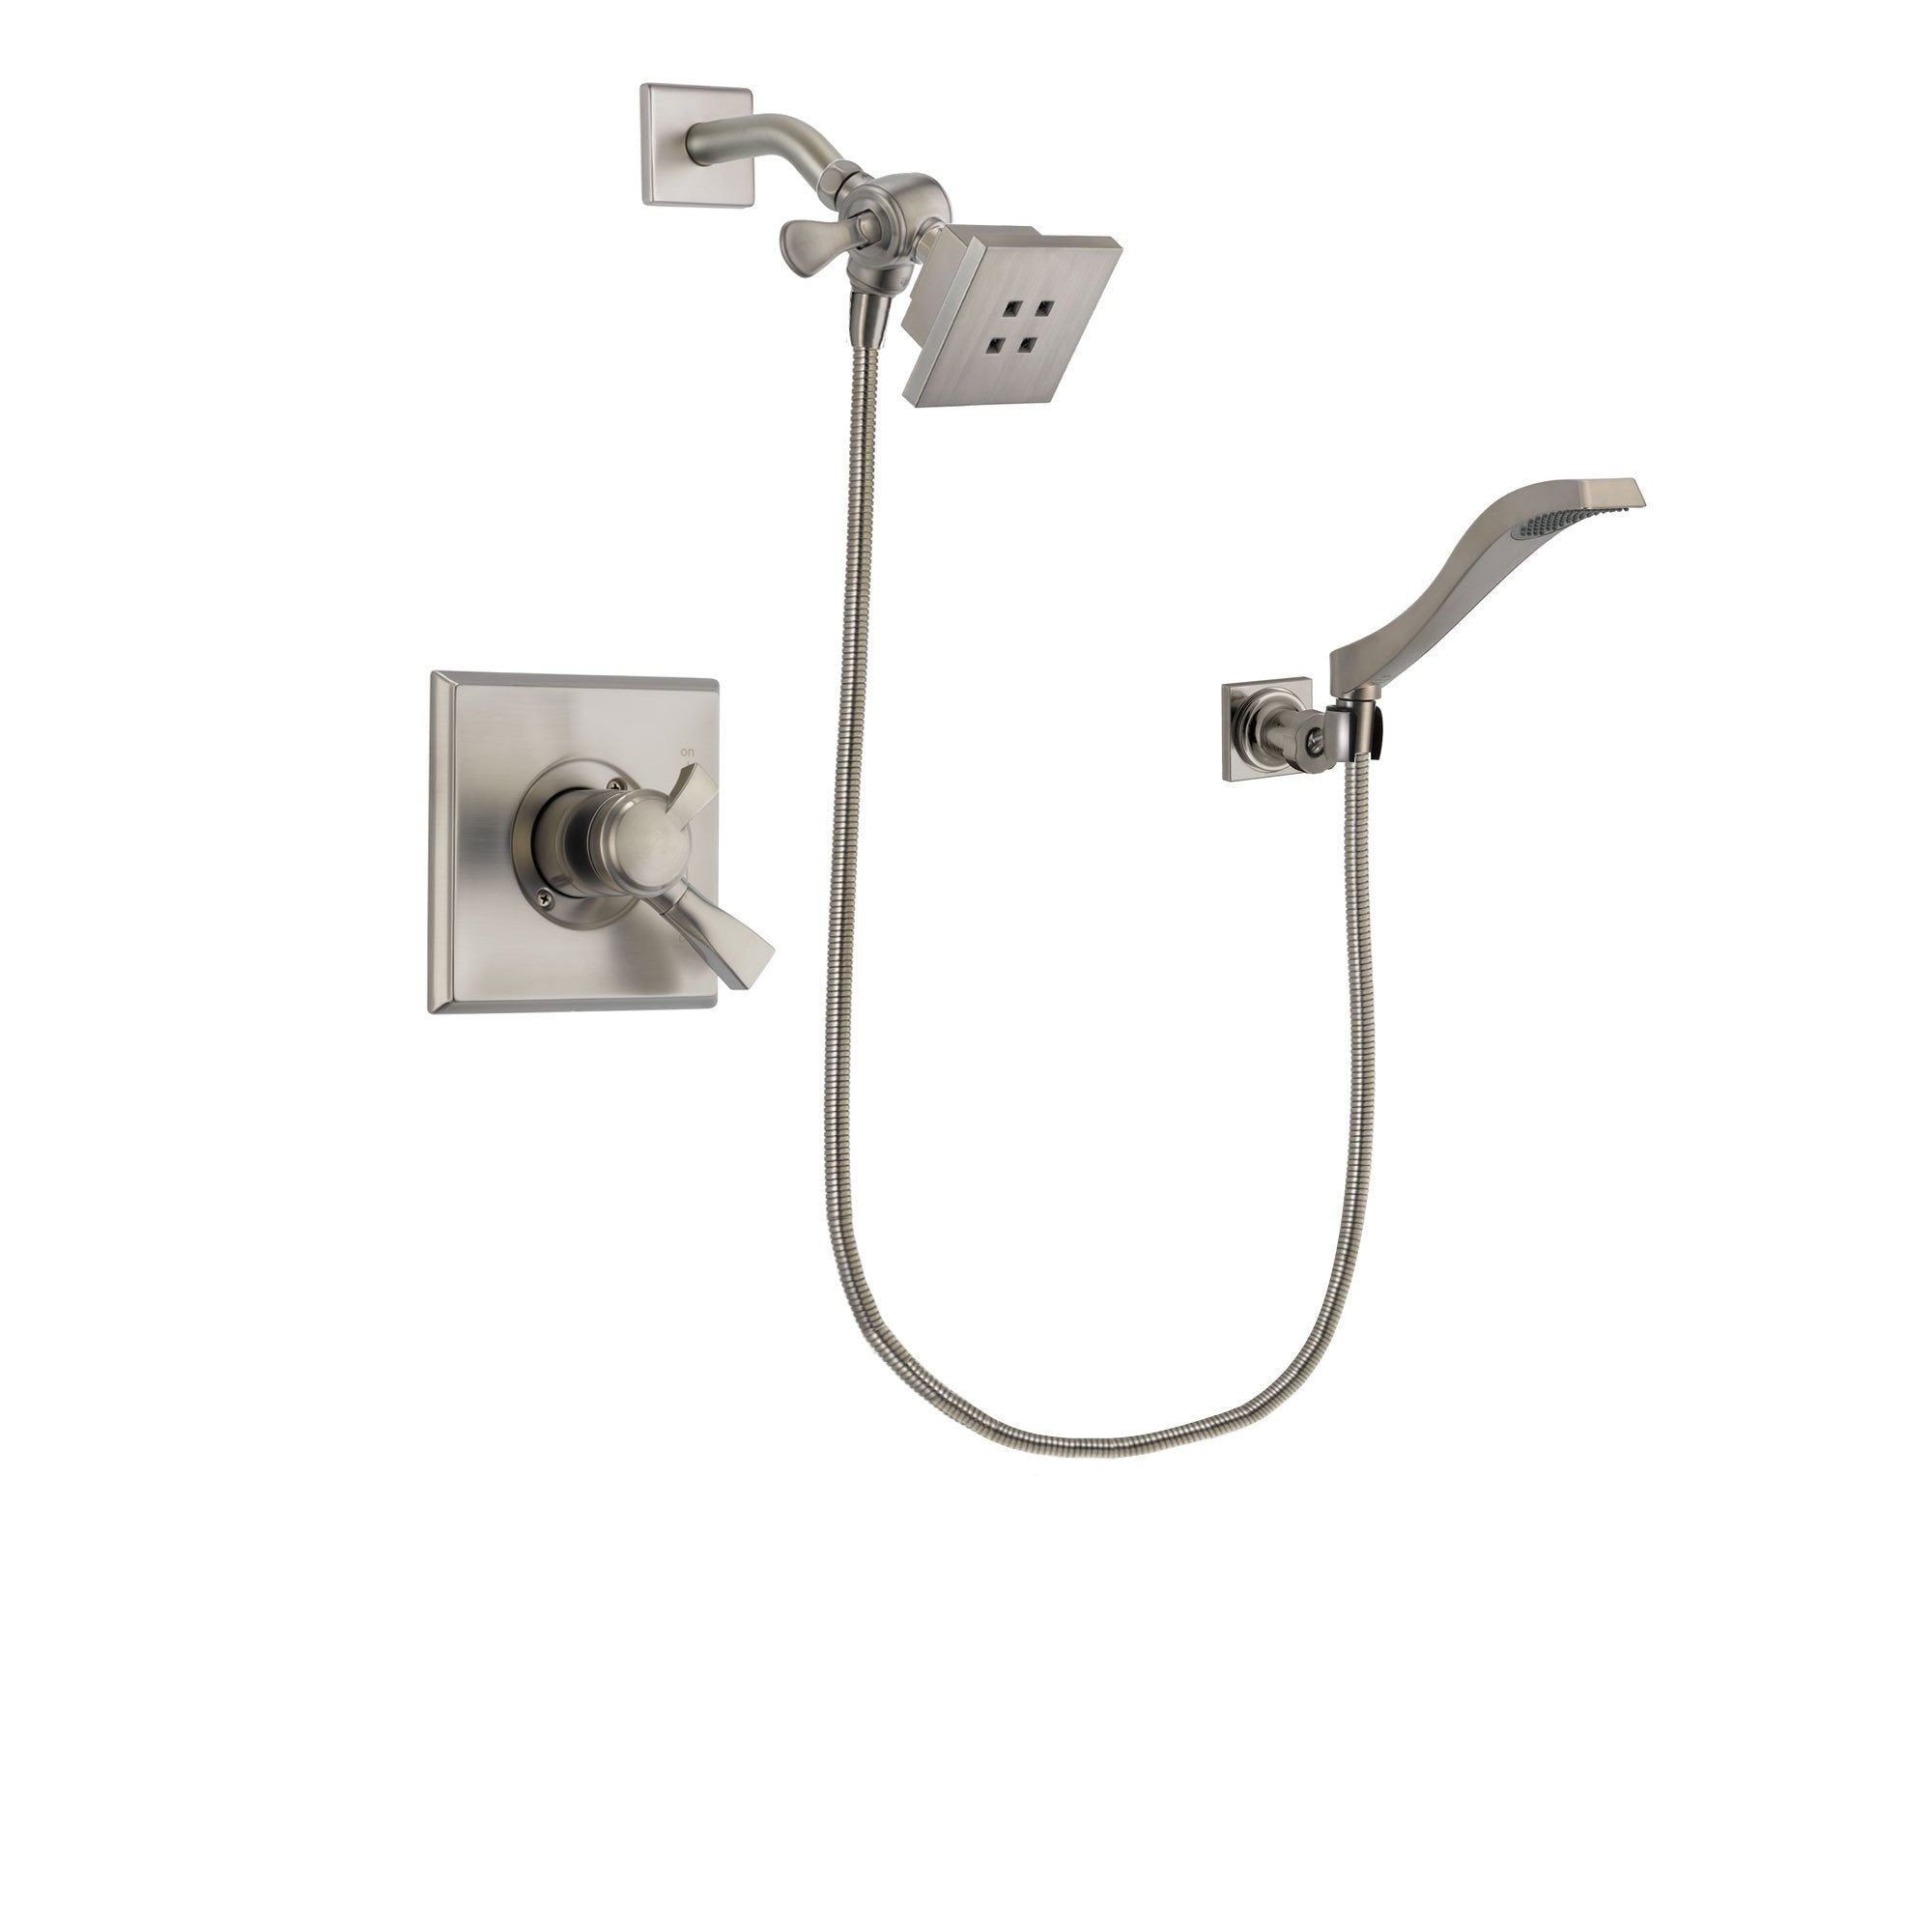 Delta Dryden Stainless Steel Finish Dual Control Shower Faucet System Package with Square Showerhead and Modern Wall Mount Handheld Shower Spray Includes Rough-in Valve DSP2070V